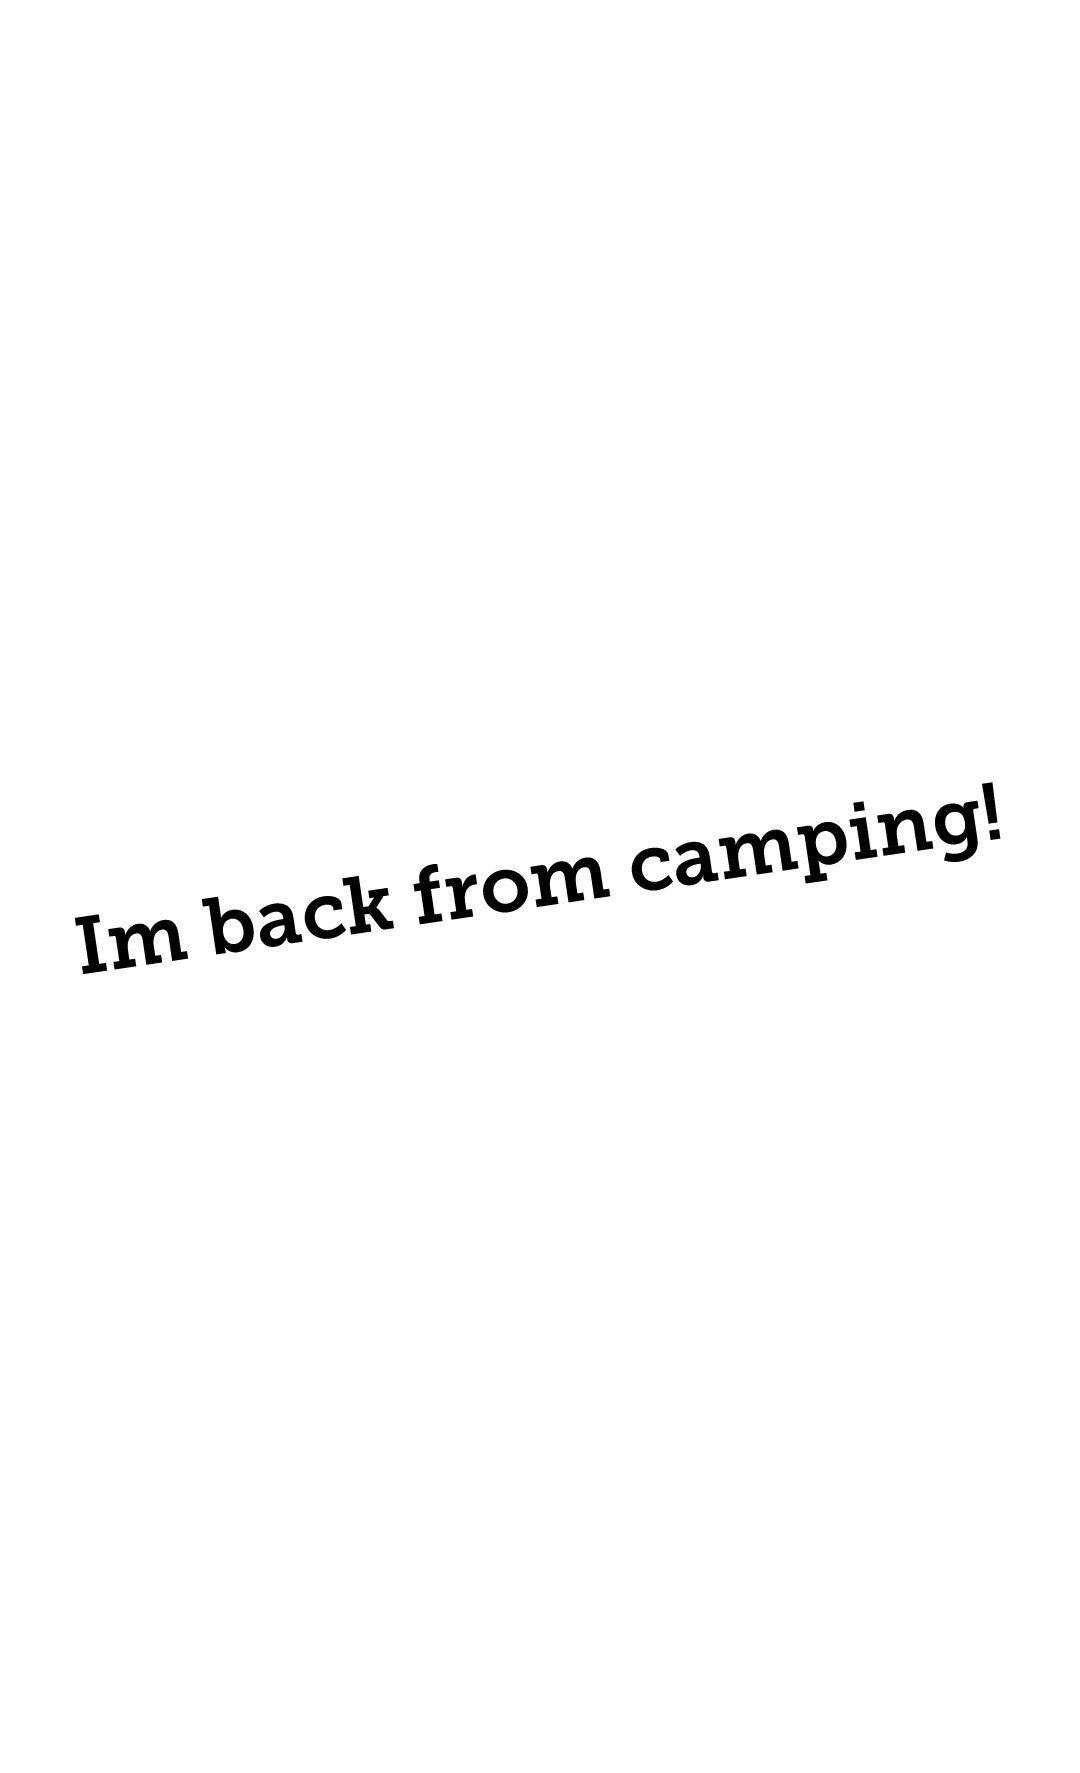 Im back from camping!